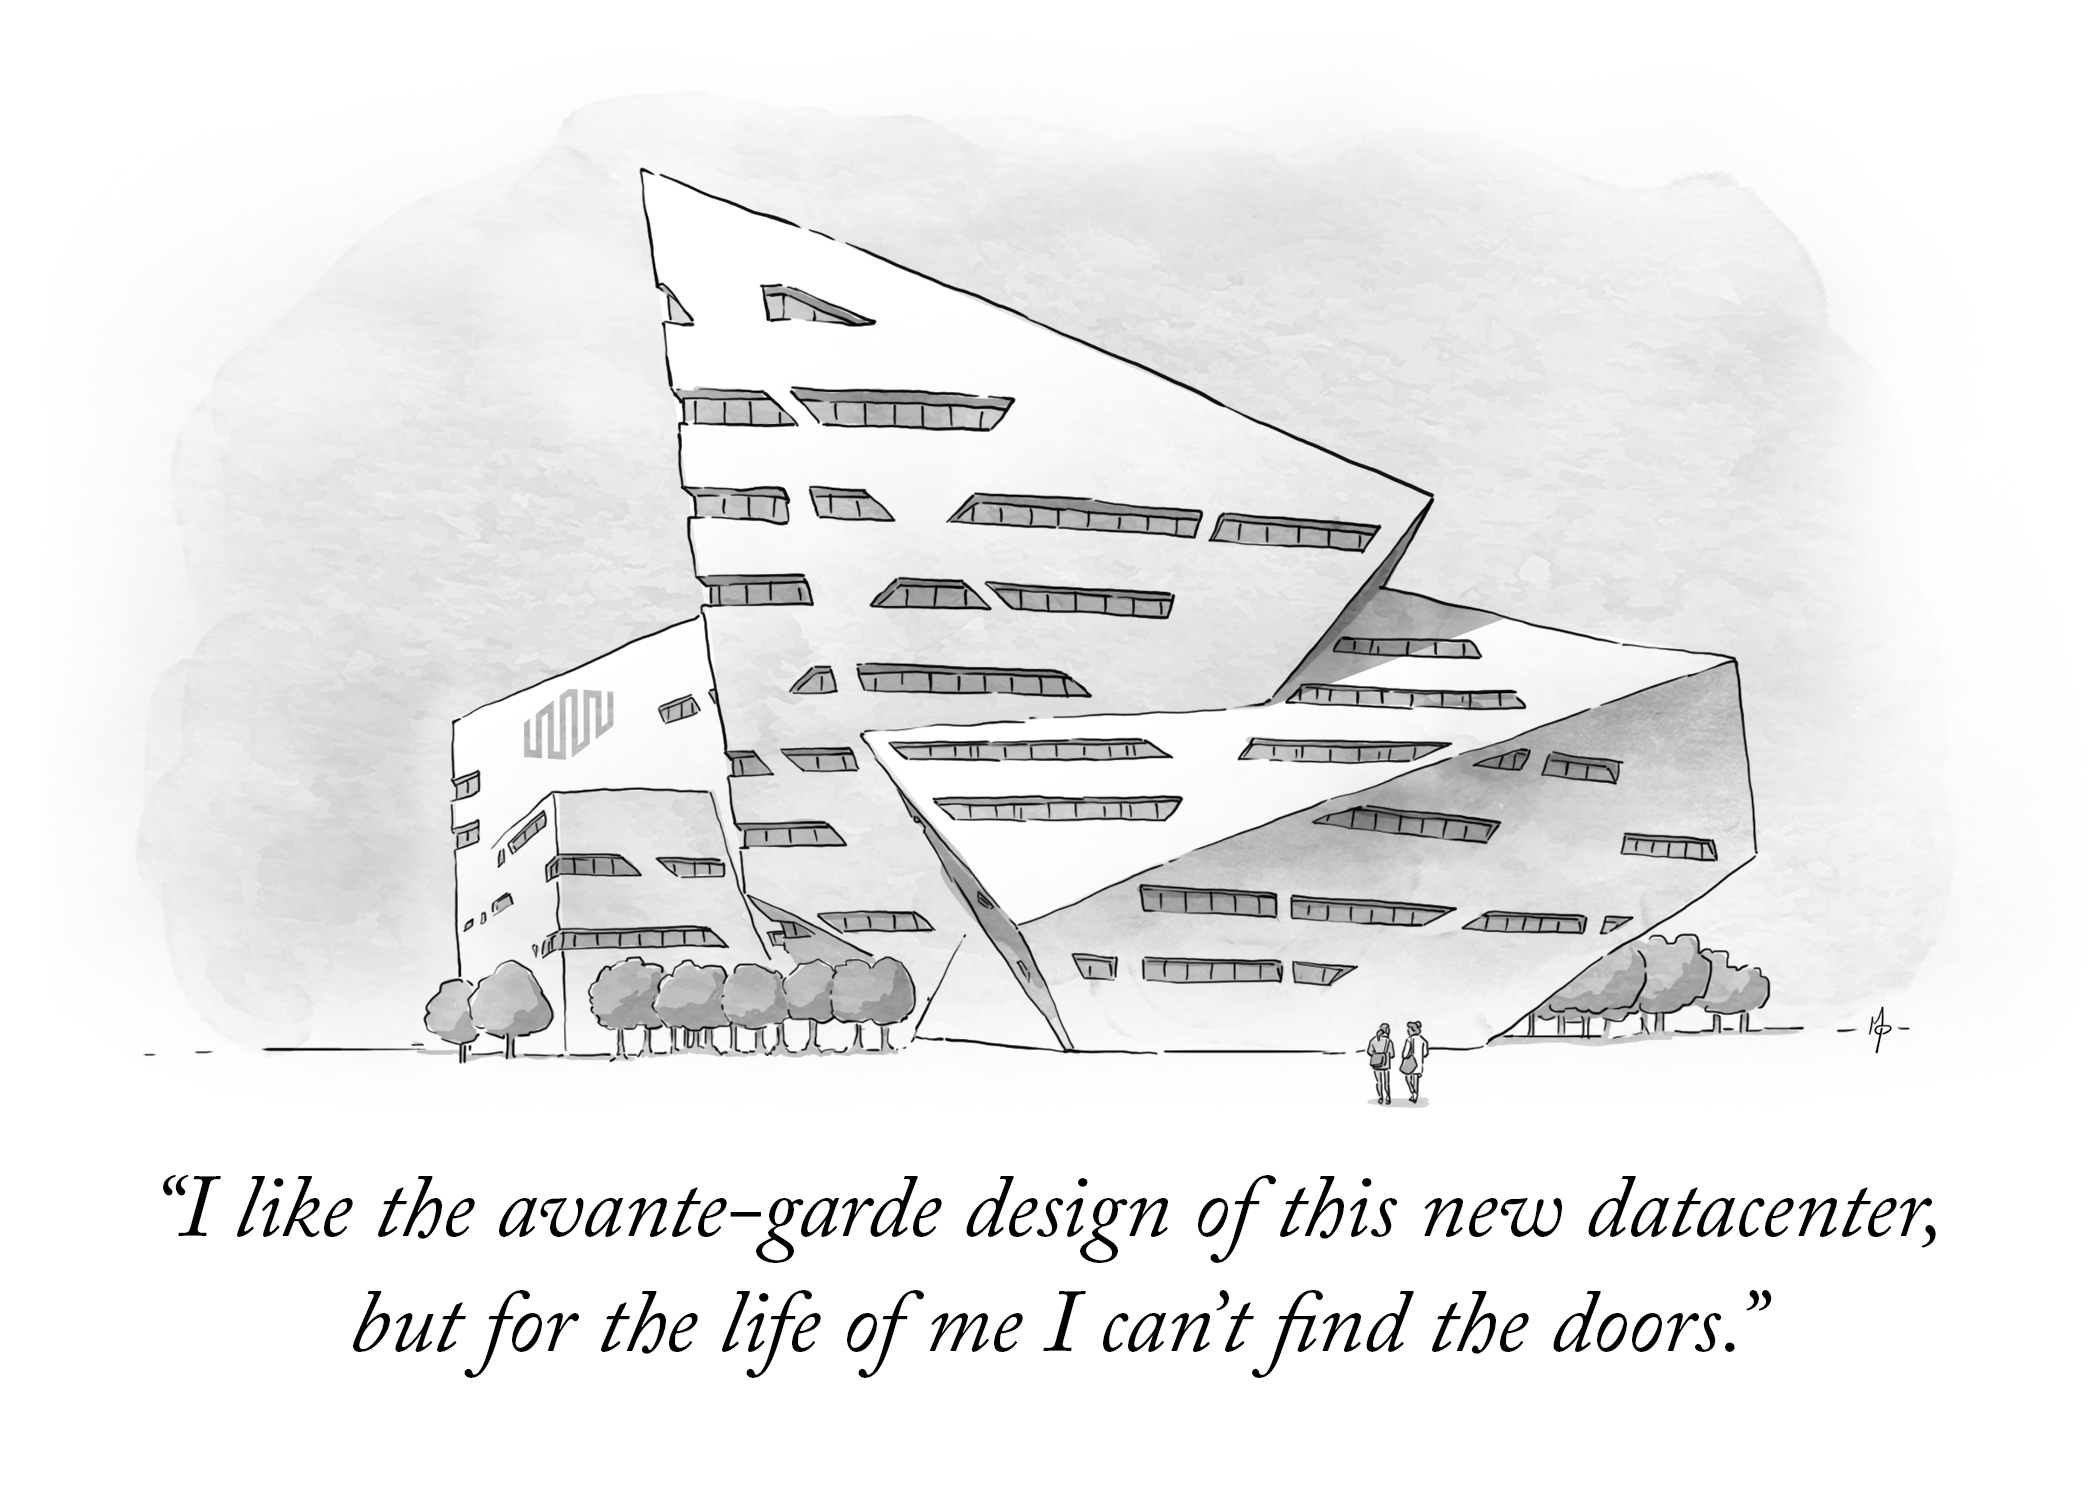 New Yorker style illustration of the exterior of a very model data center, which has an angular roof and other strange shapes. Two characters are having a conversation outside on the lawn. The caption reads: I like the avante-garde design of this new data center, but for the life of me I can't find the door.